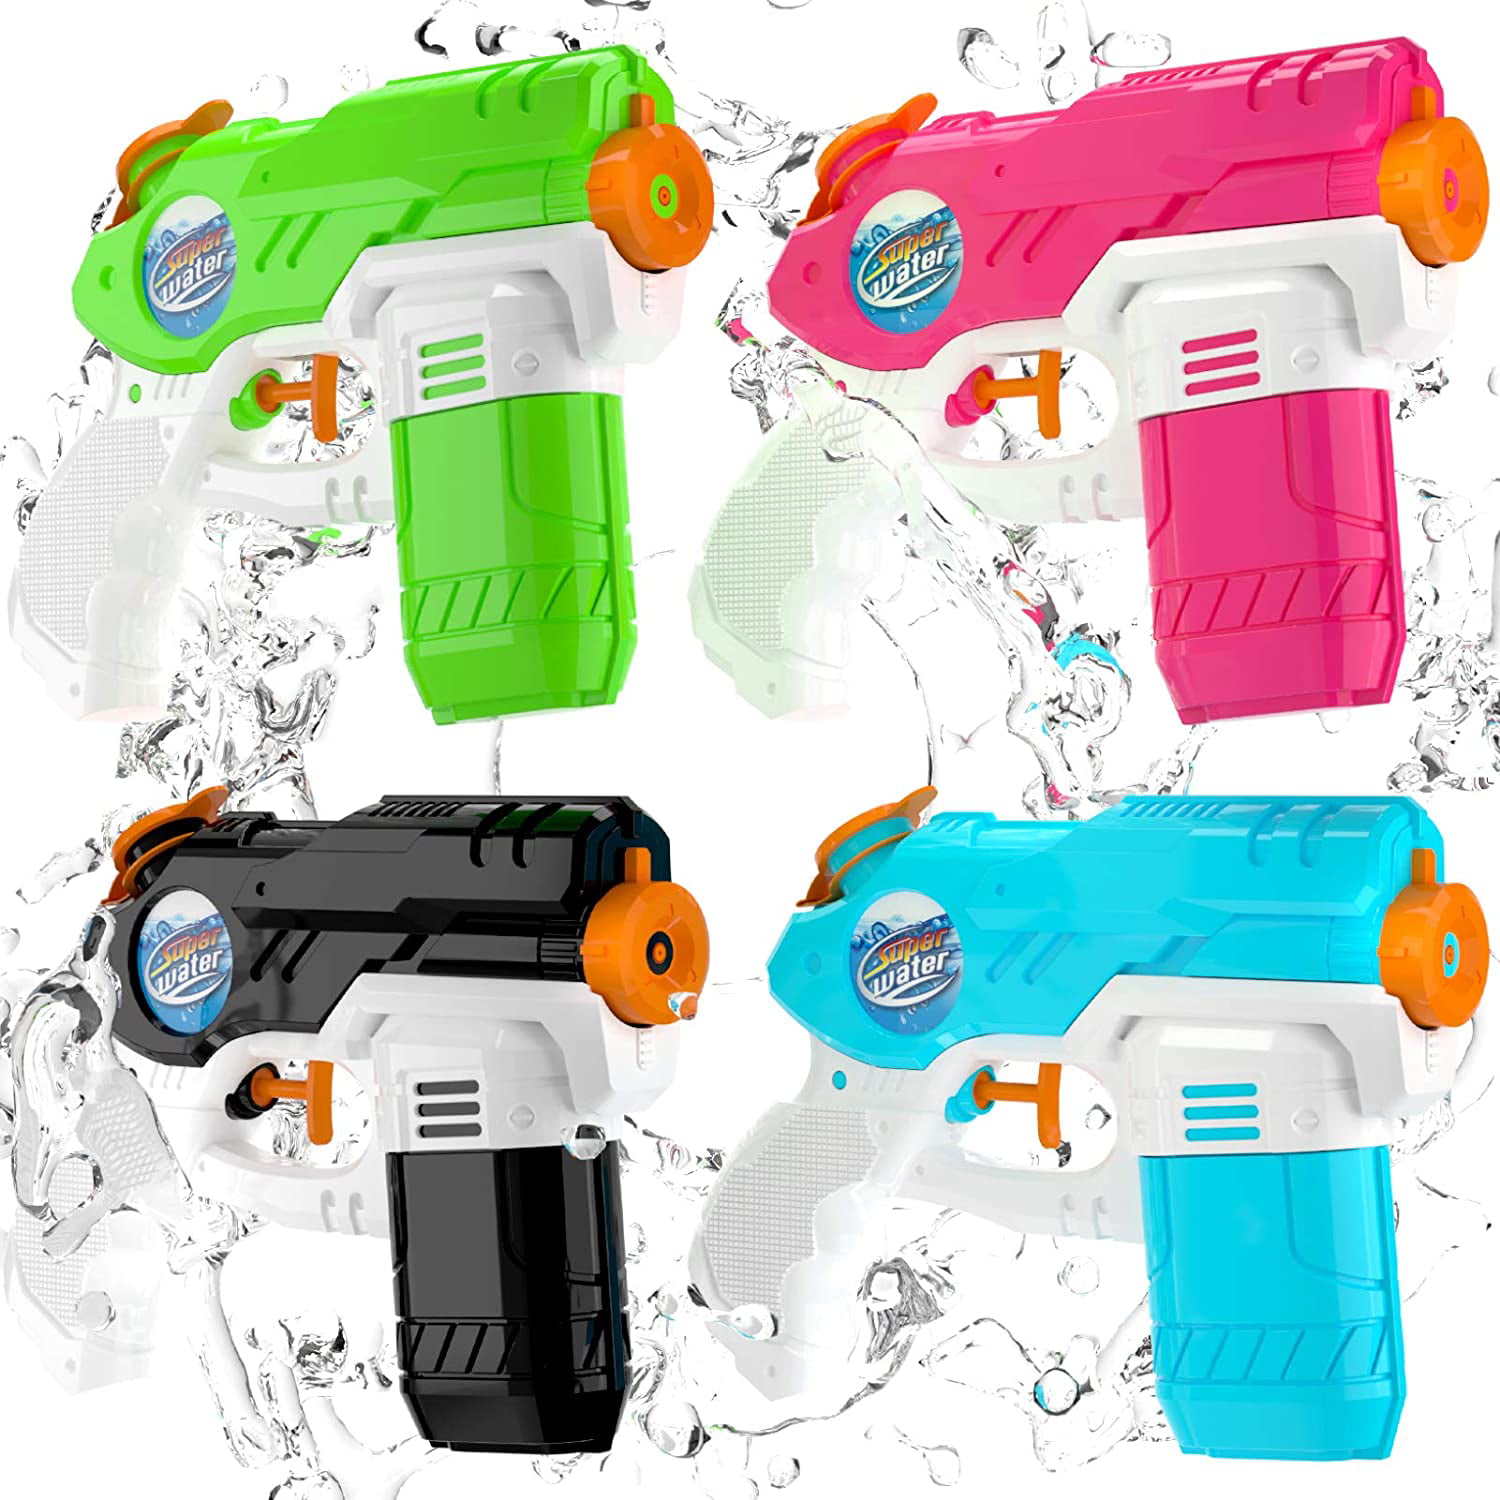 Yard Games for Toddlers OMWay Water Guns for Kids 4 Pack Soaker Squirt Guns,Easter Birthday Gifts for 3 4 5 6 7 8 Year Old Boys Girls Water Toys for Kids Backyard Pool Beach Outdoor.